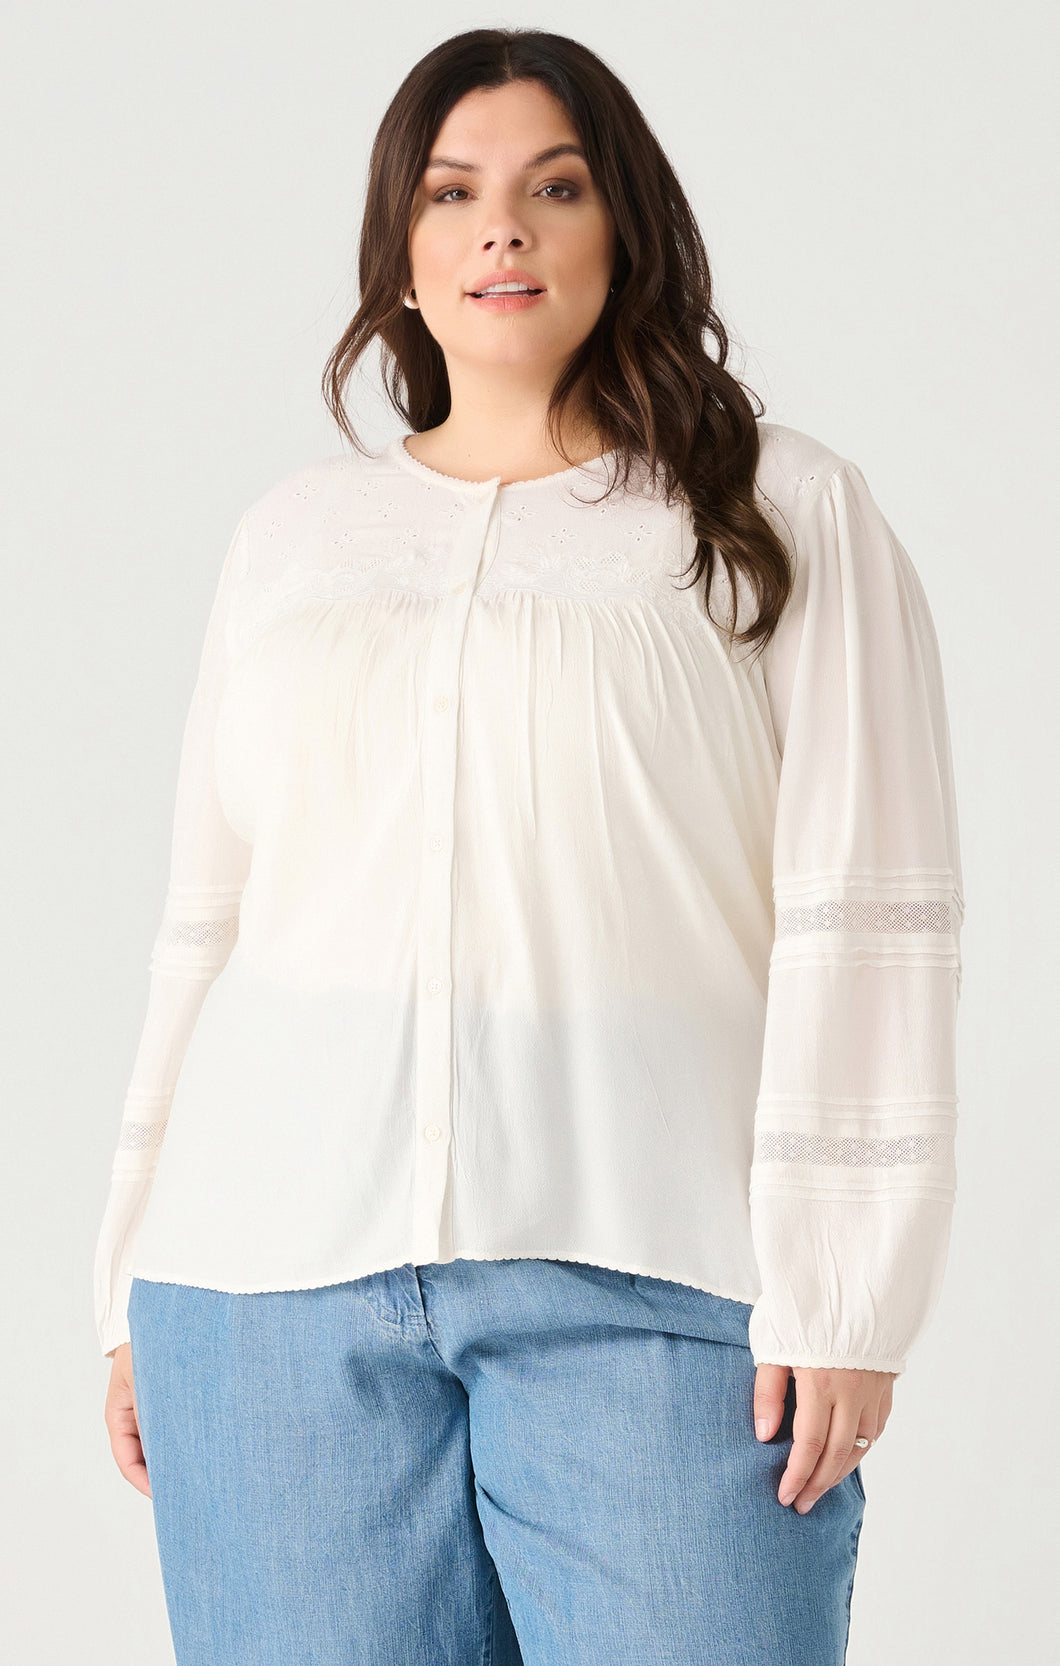 LACE DETAIL BUTTON UP BLOUSE by Dex (available in plus sizes)